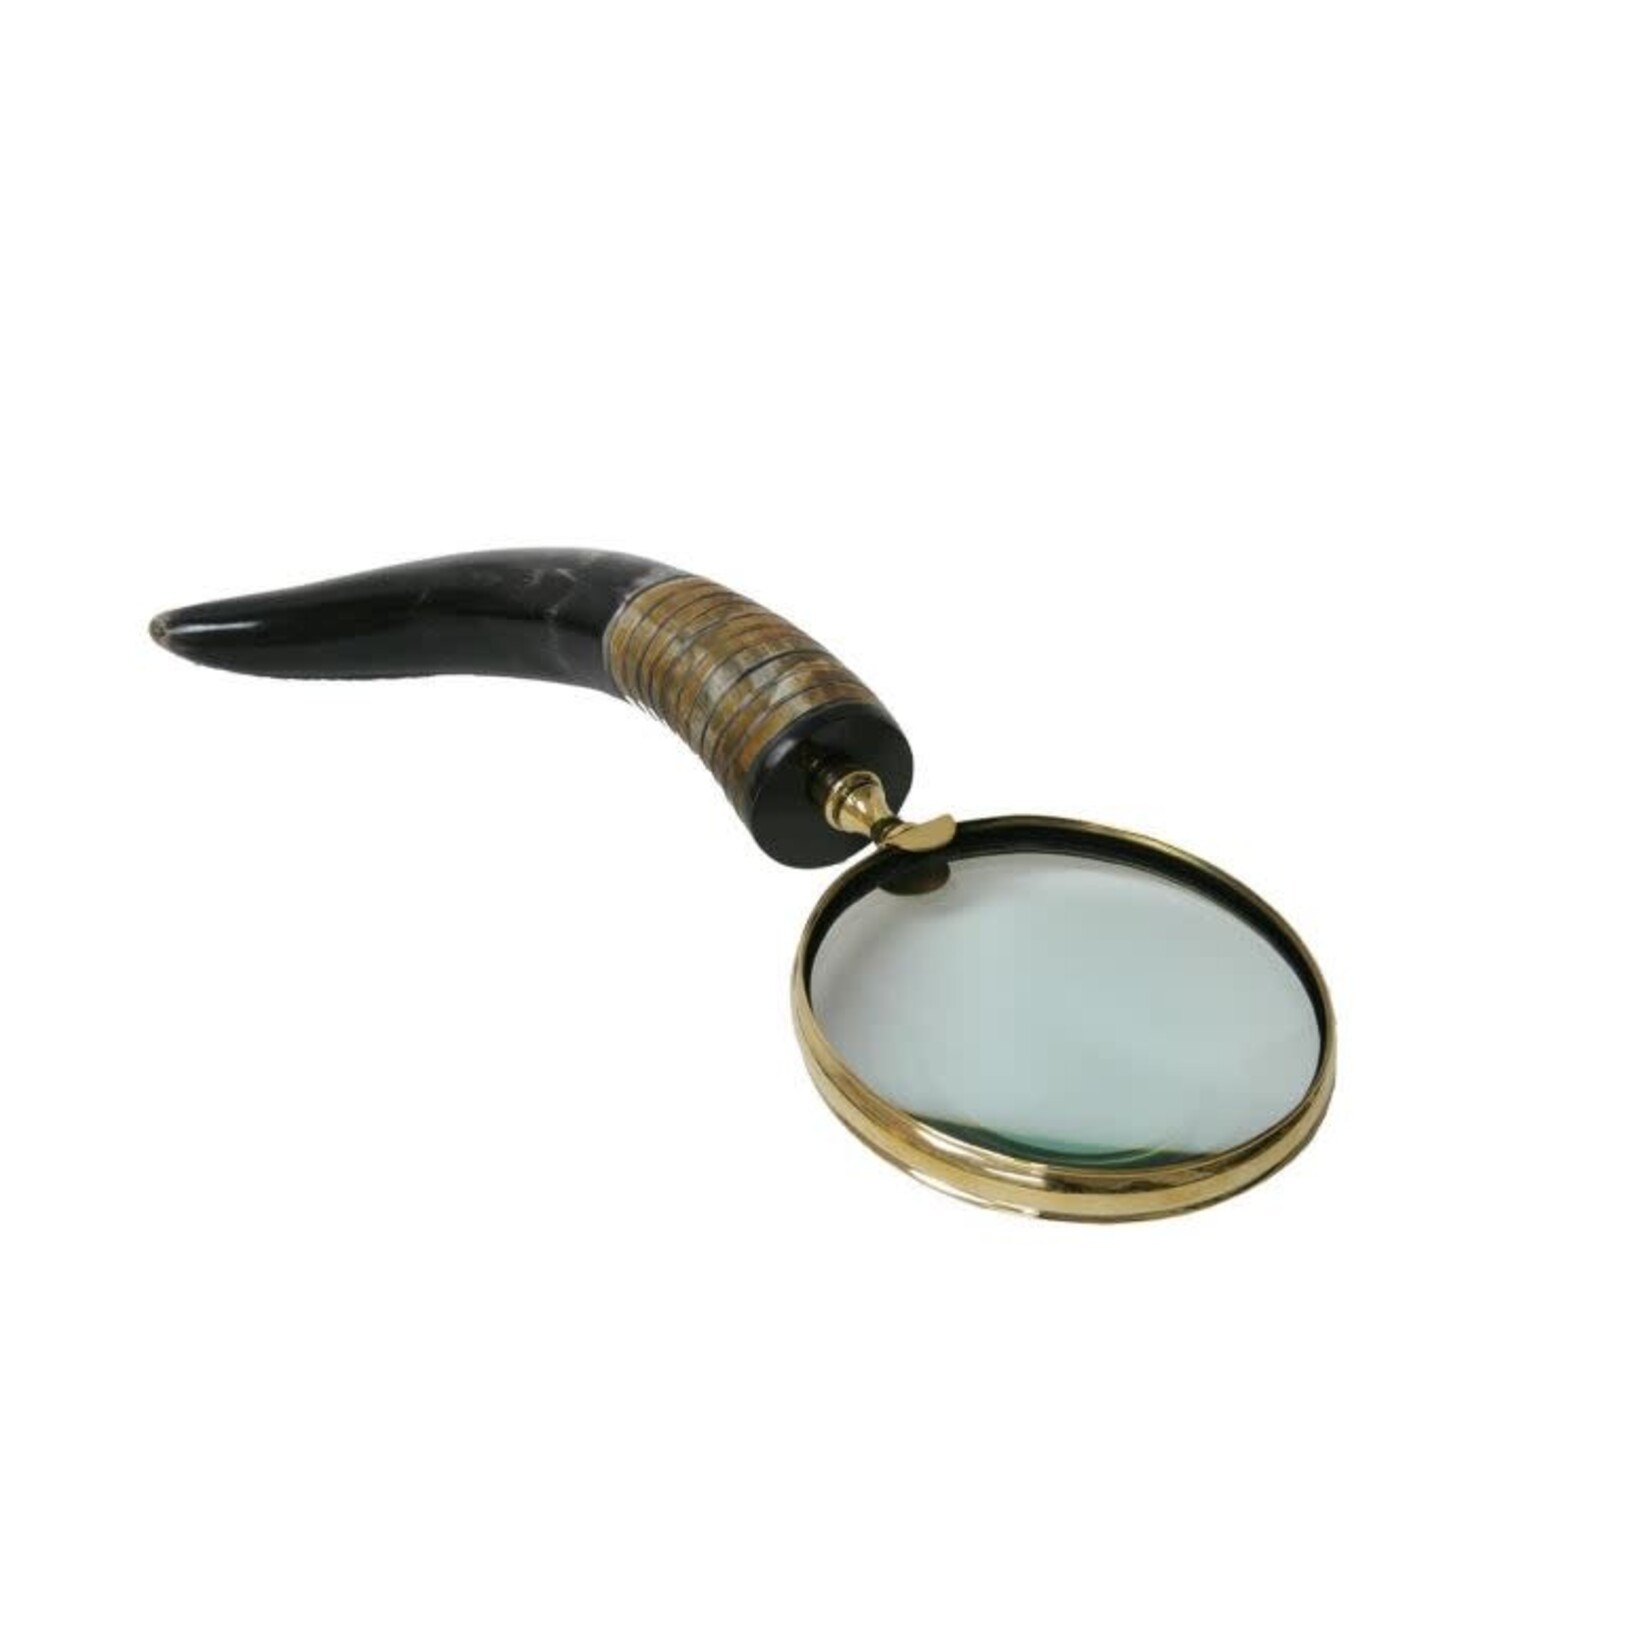 Frances Stoia Assoc Variegated Horn Magnifying Glass with Half Burnished Carved Handle